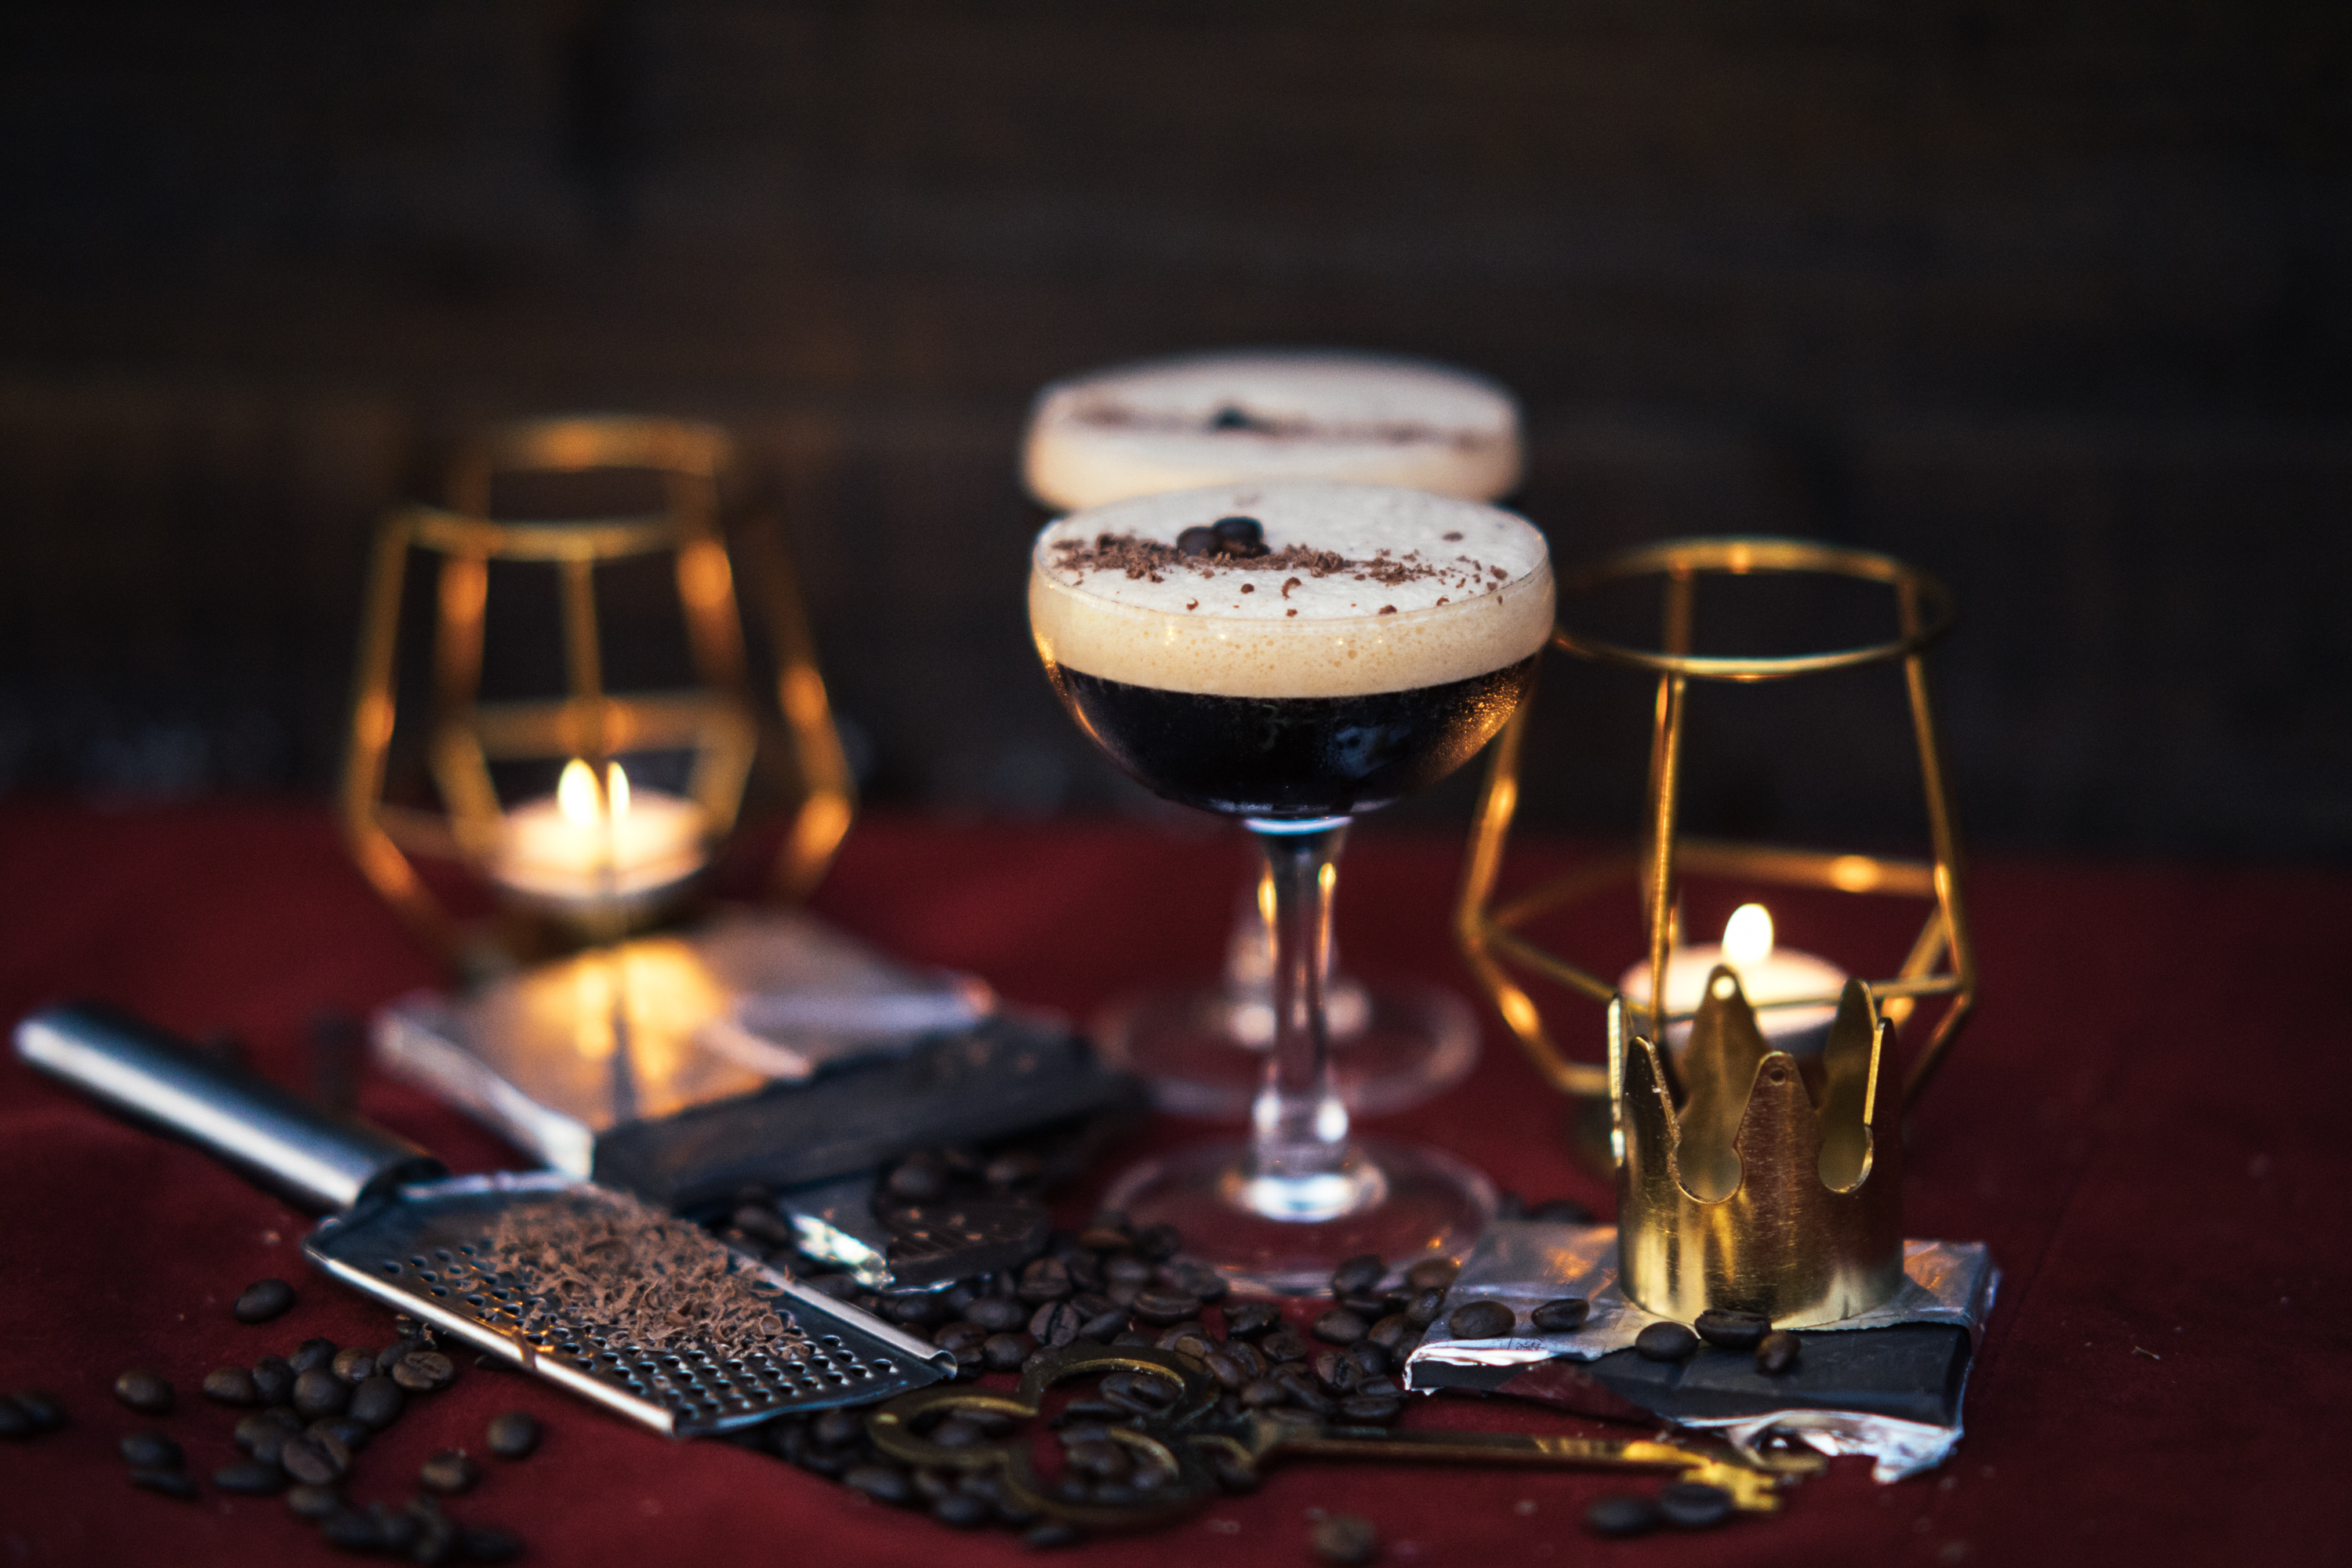 10 of the Best: Espresso Martinis in London, Espresso Martinis in London, Espresso Martinis London, Espresso Martini in London, best Espresso Martini in London, espresso Martini London